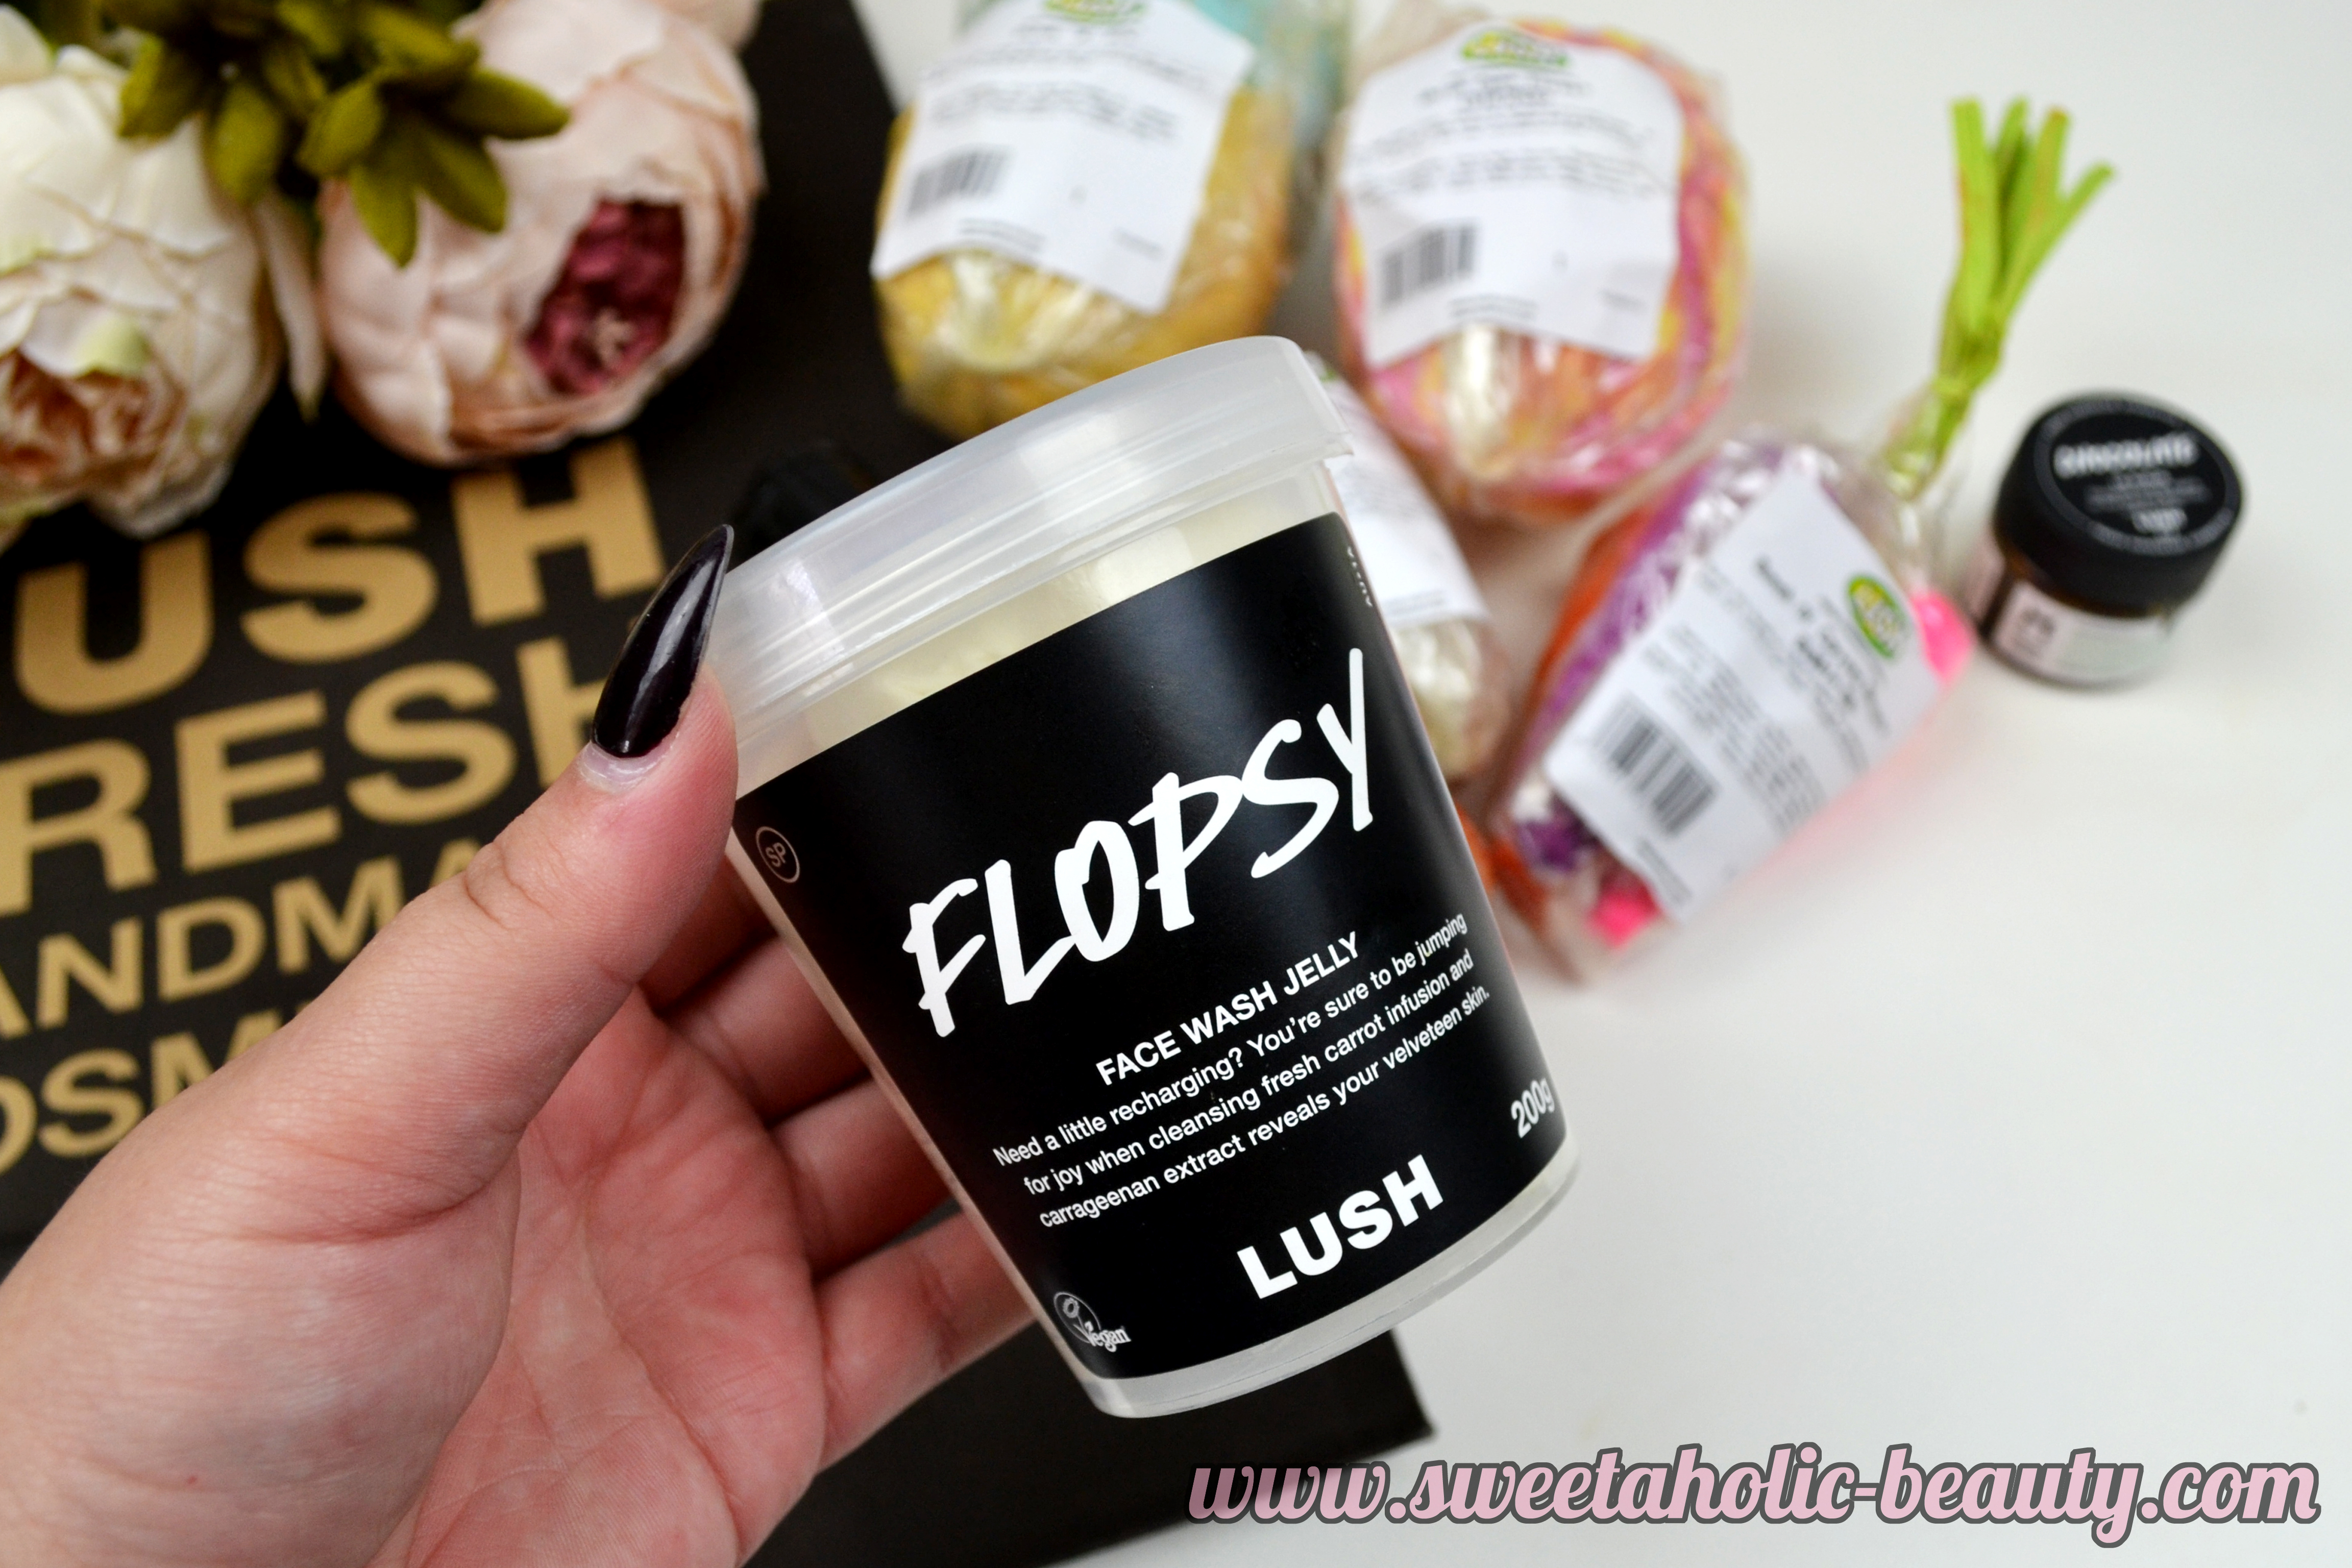 Lush Cosmetics Easter Collection 2017 - Sweetaholic Beauty